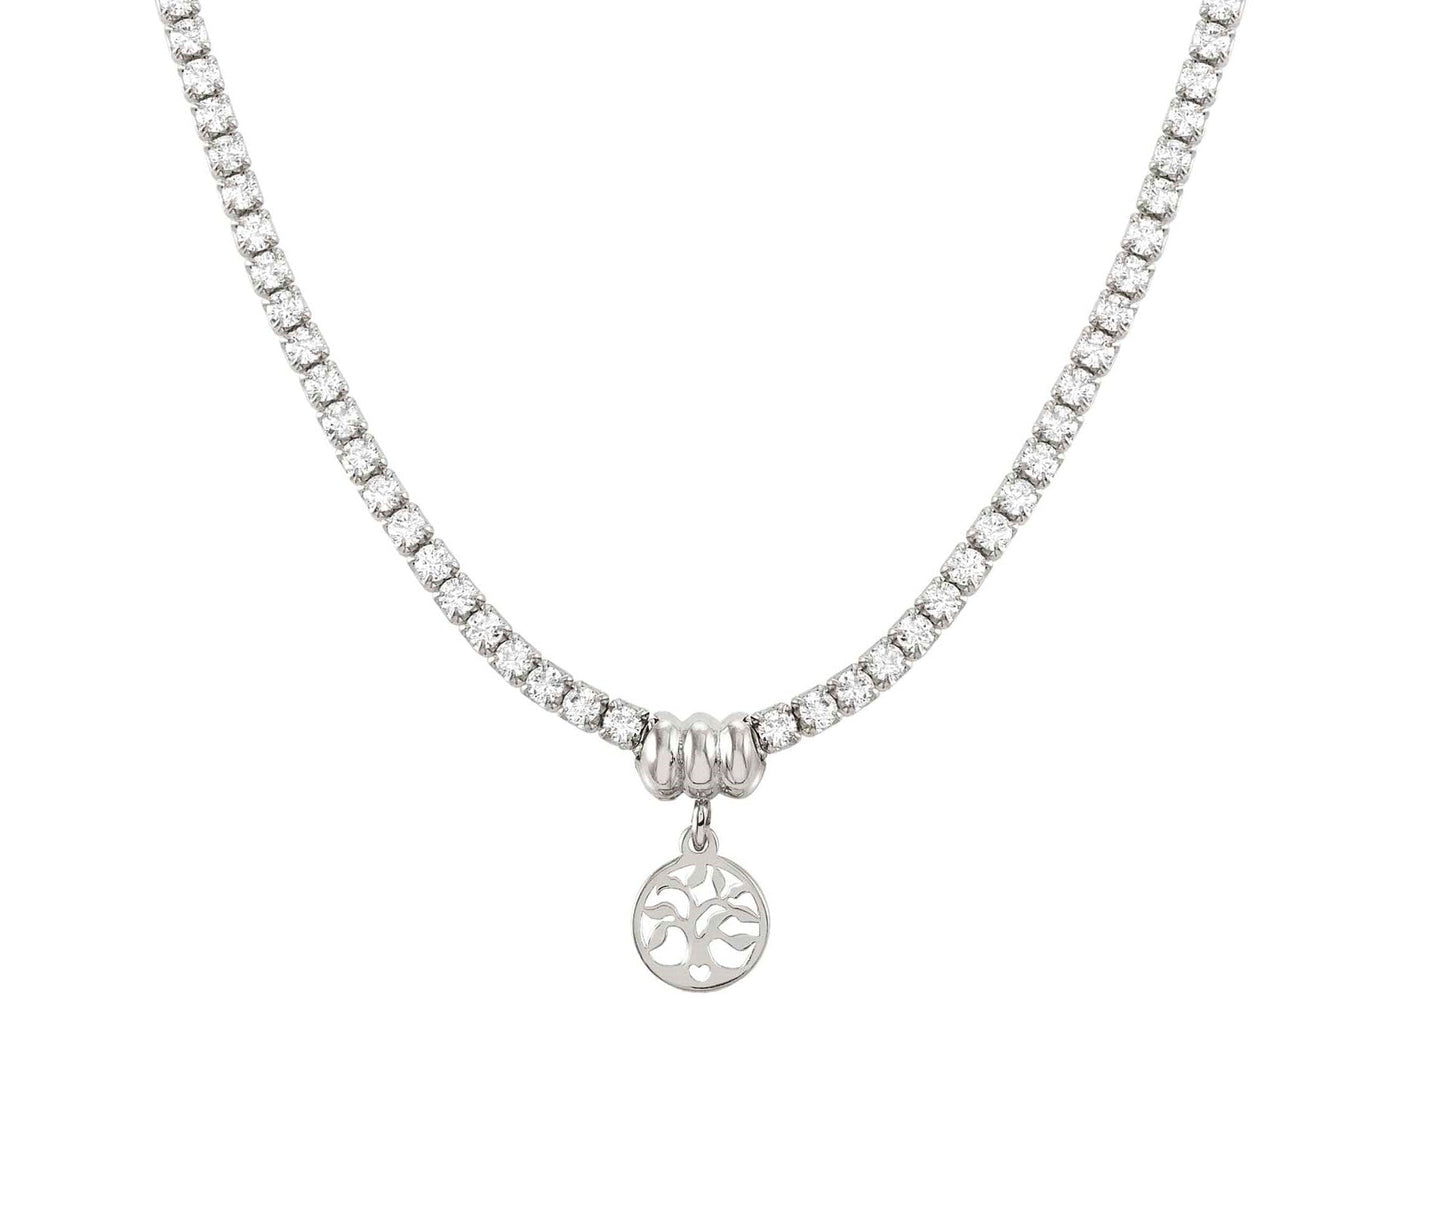 Nomination Chic & Charm Necklace with CZ Silver Tree of Life